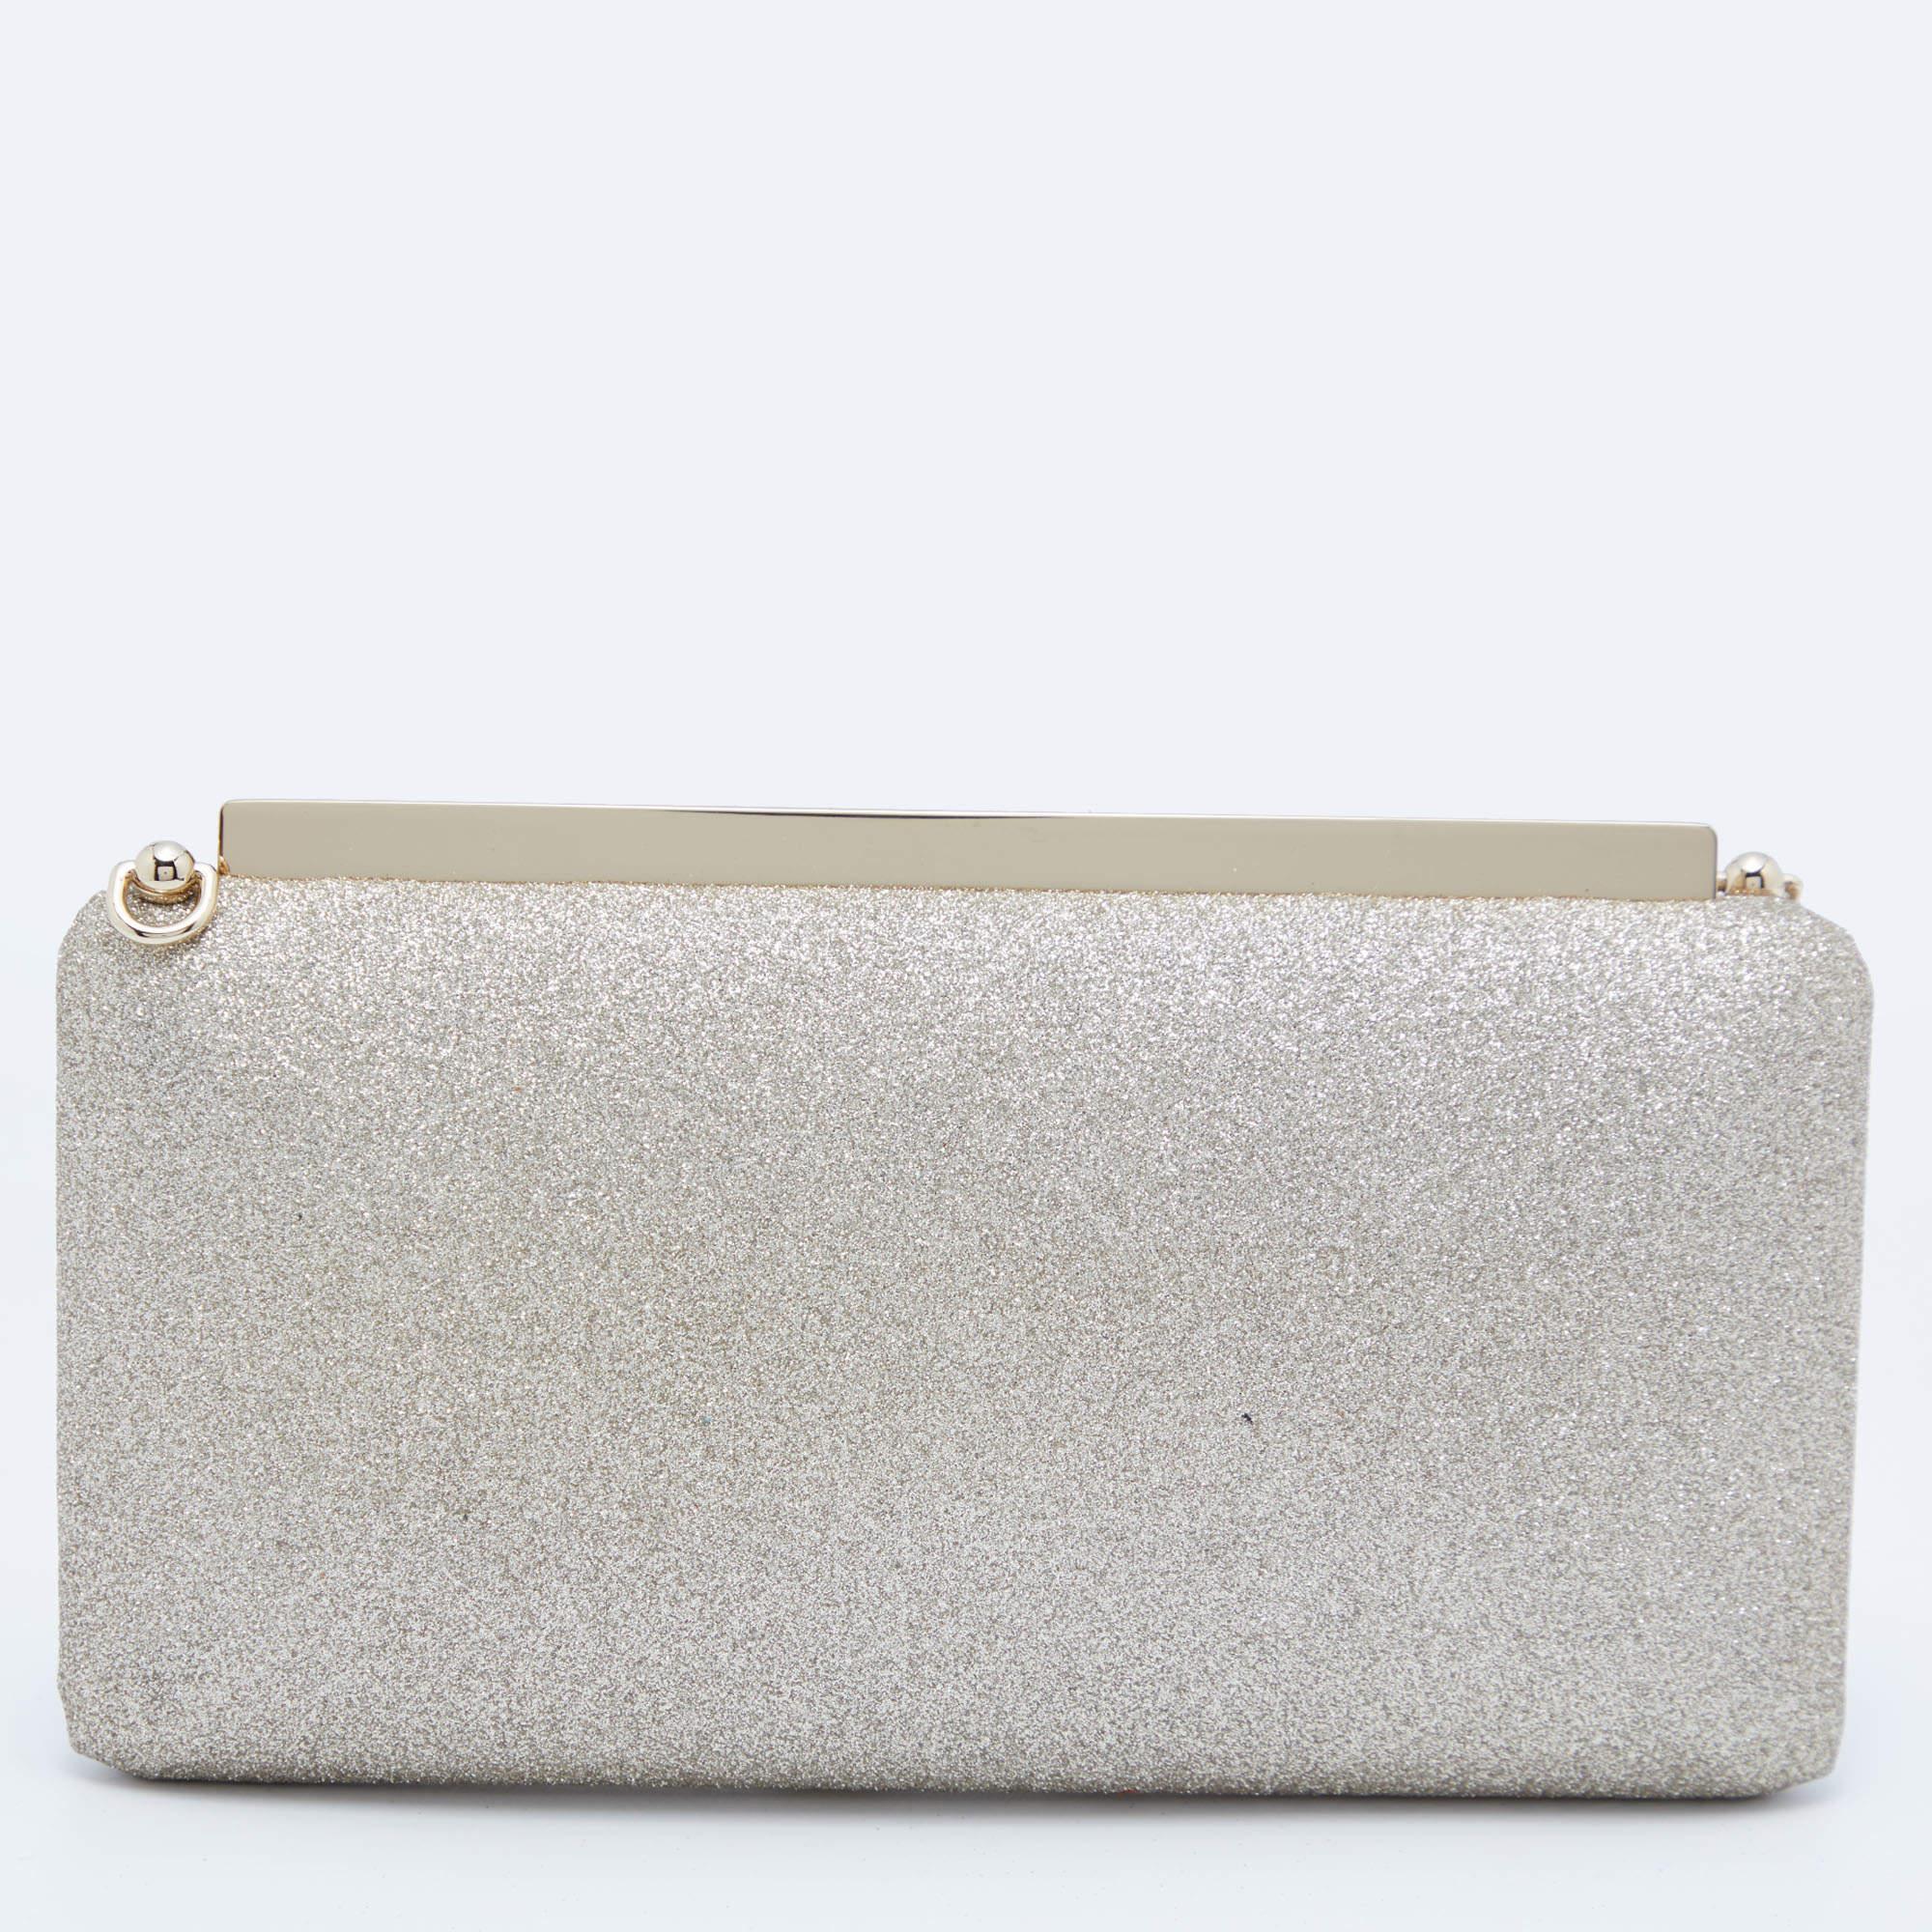 Be a head-turner at the next party with this shimmery leather clutch. The leather-lined interior feature multiple slots to keep your essentials neatly. This adorable creation is decorated with gold-tone accents and features a brand name engraved